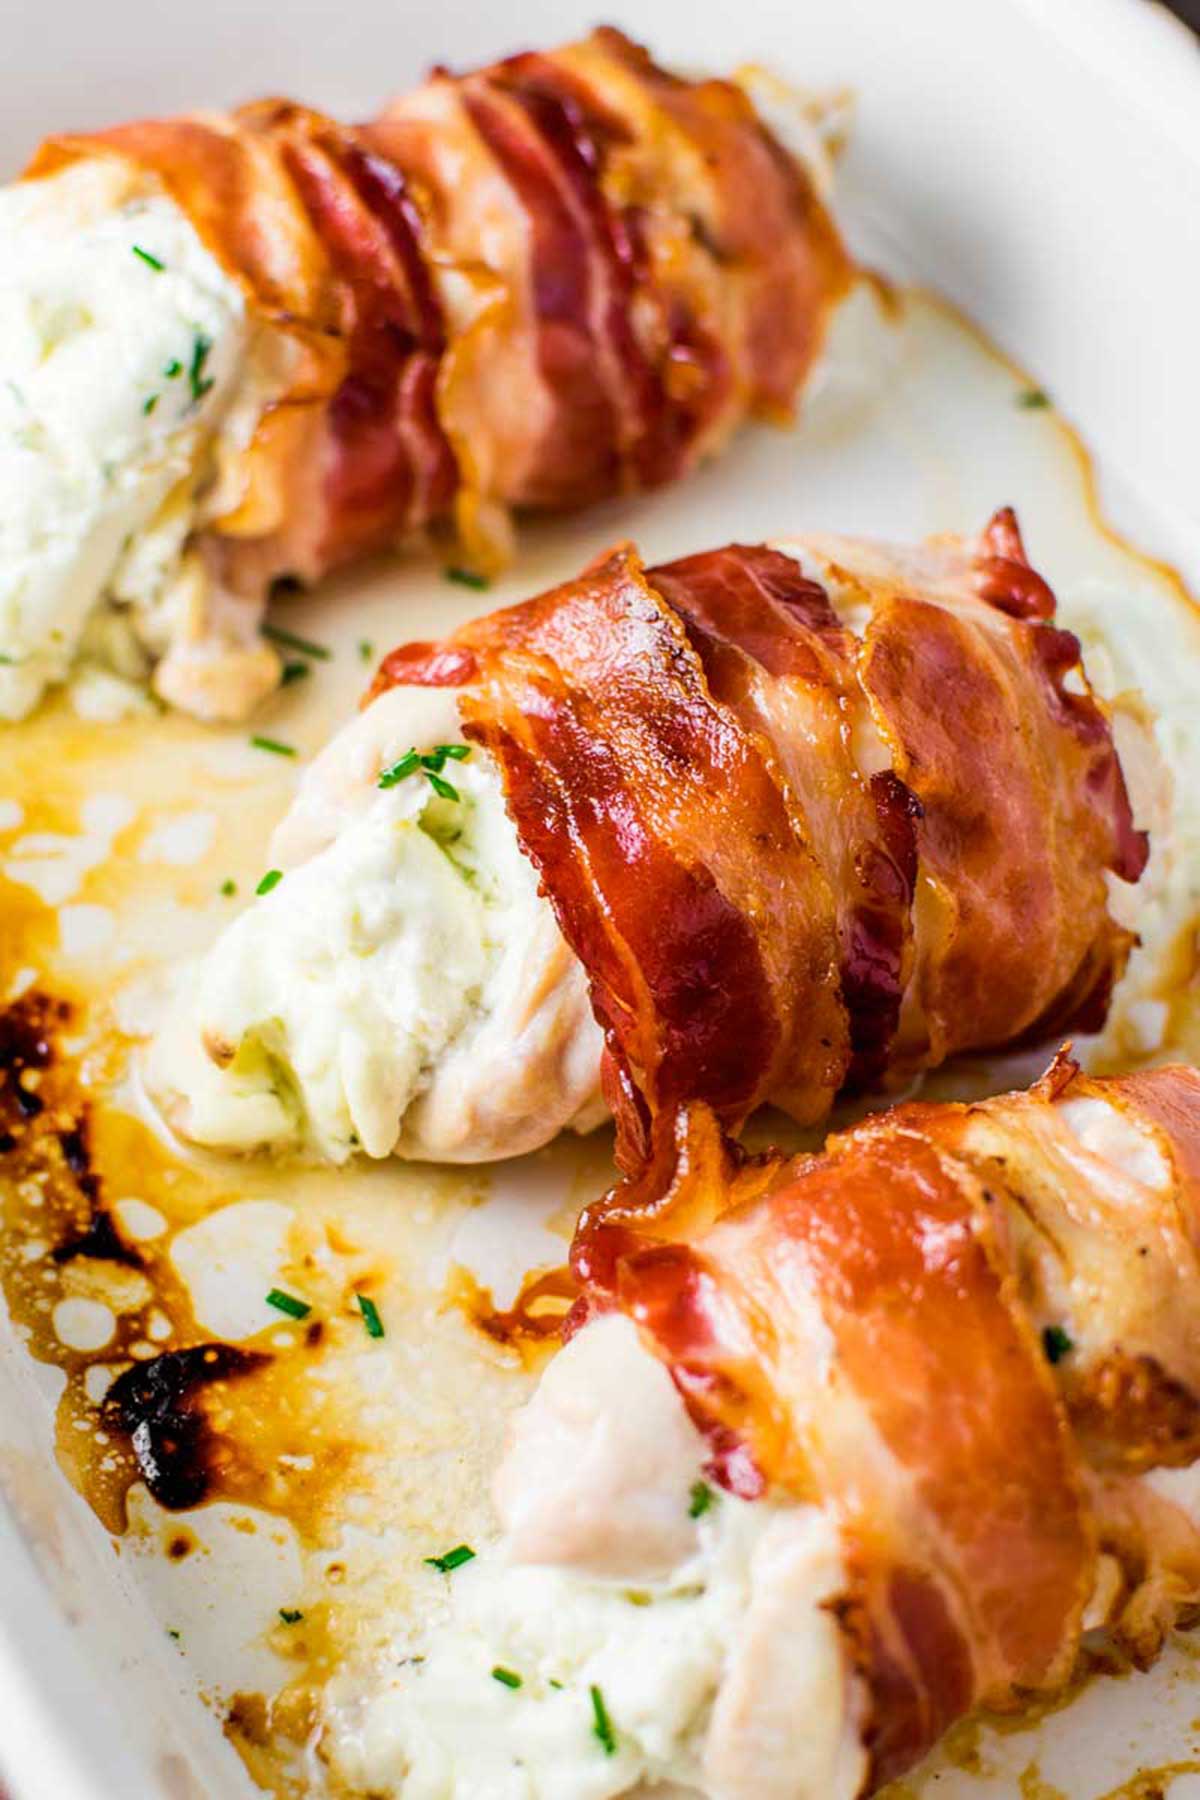 Stuffed chicken wrapped in bacon